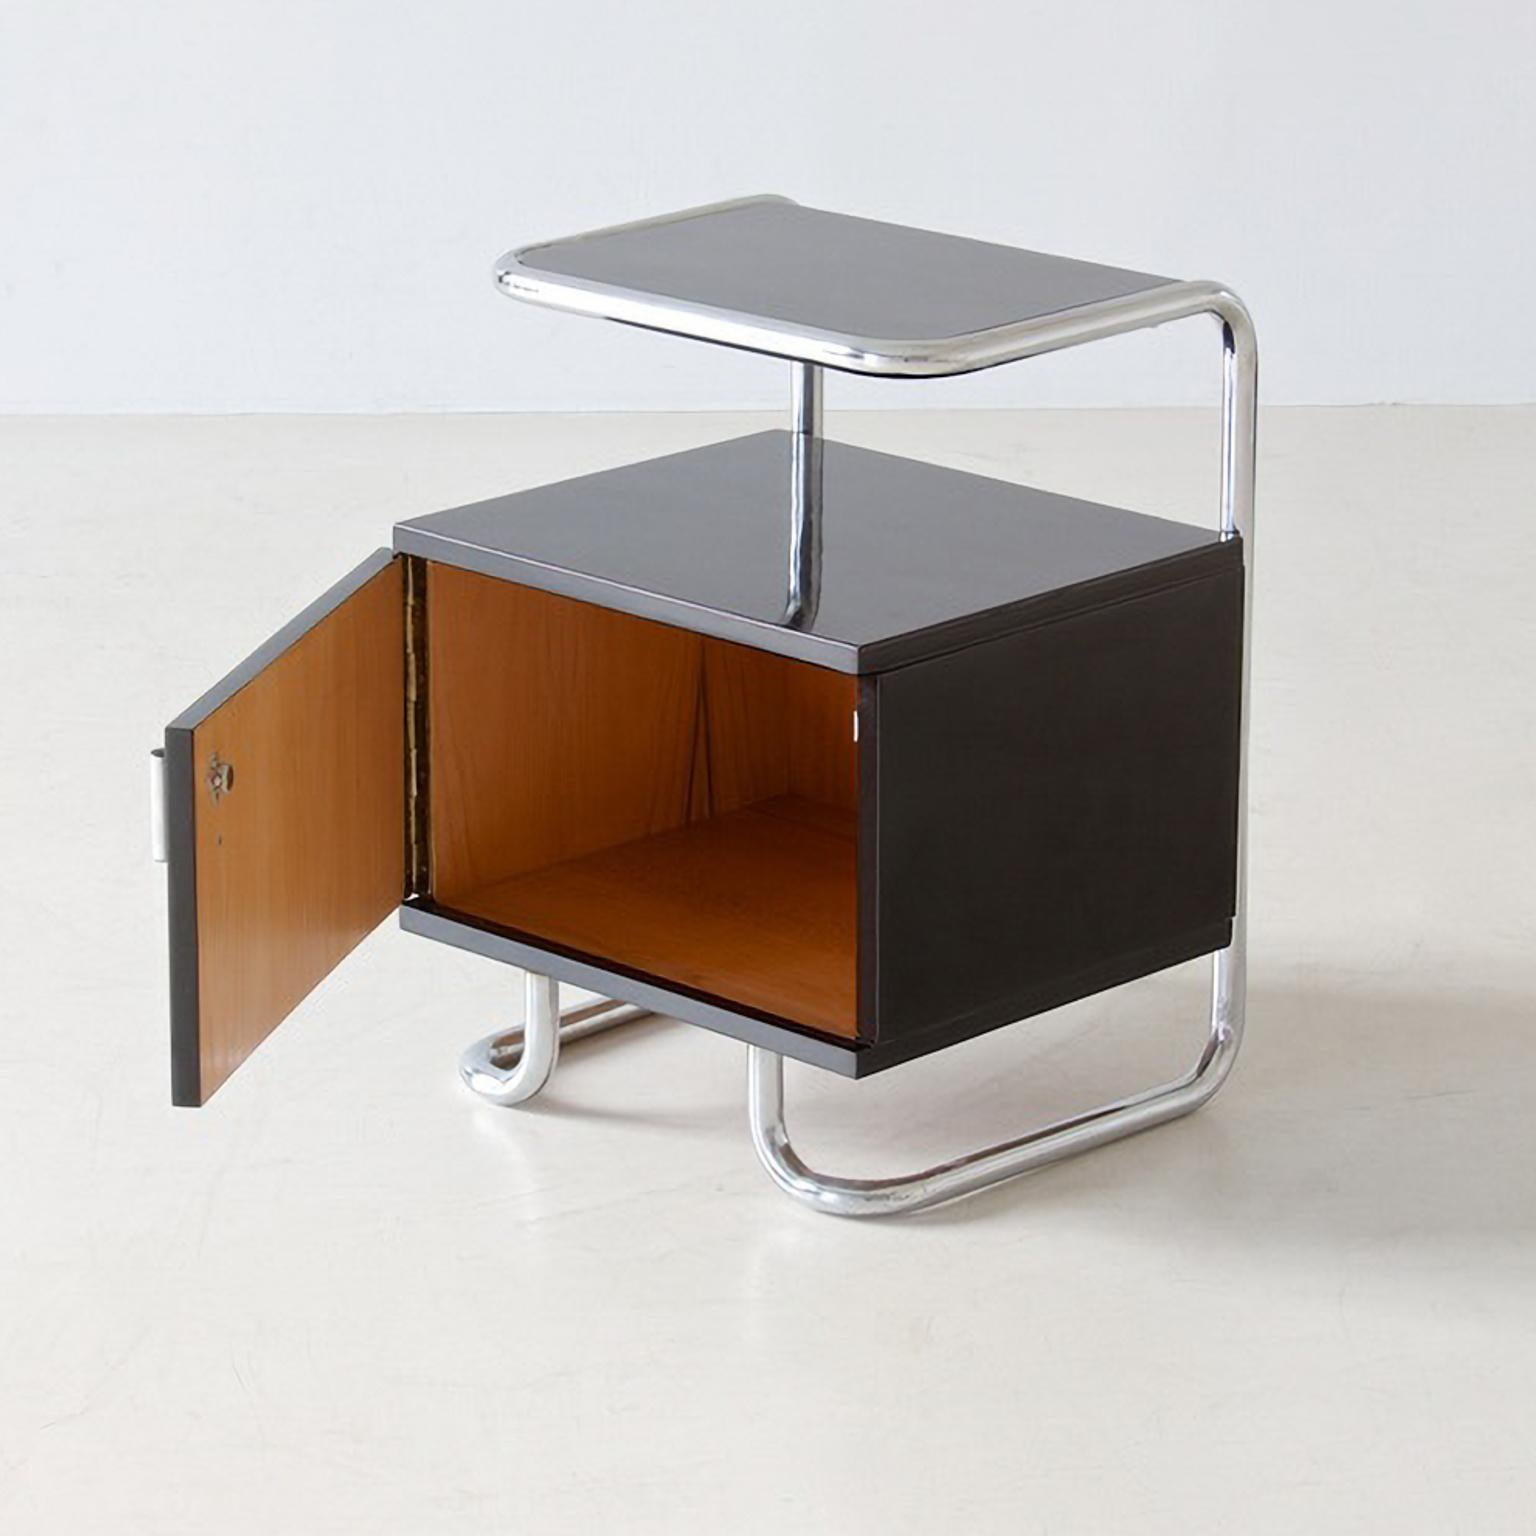 Plated Art Deco Bedside Cabinets in Black Glossy Lacquered Wood and Chromed Steel, 1930 For Sale